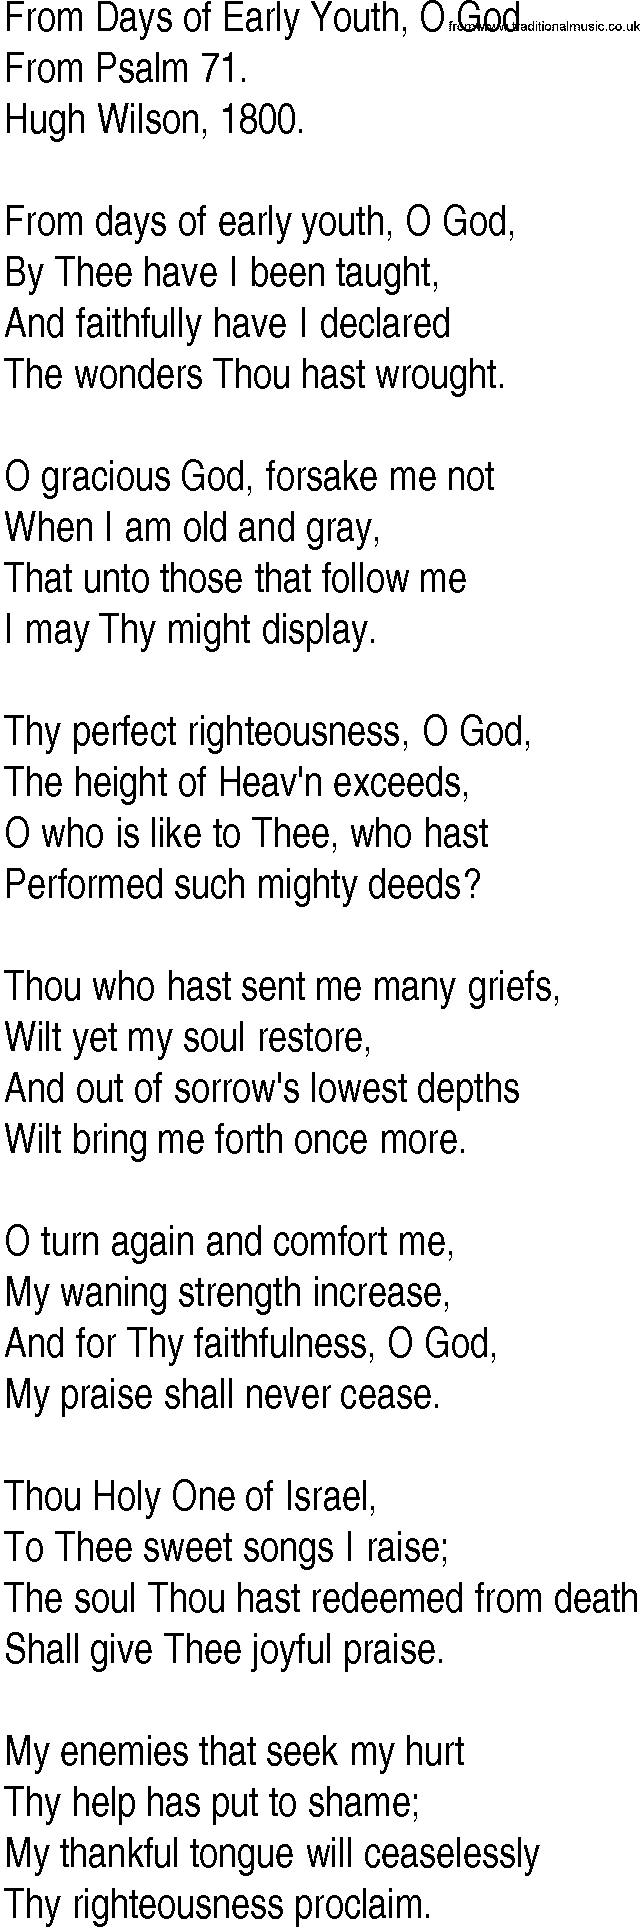 Hymn and Gospel Song: From Days of Early Youth, O God by From Psalm lyrics